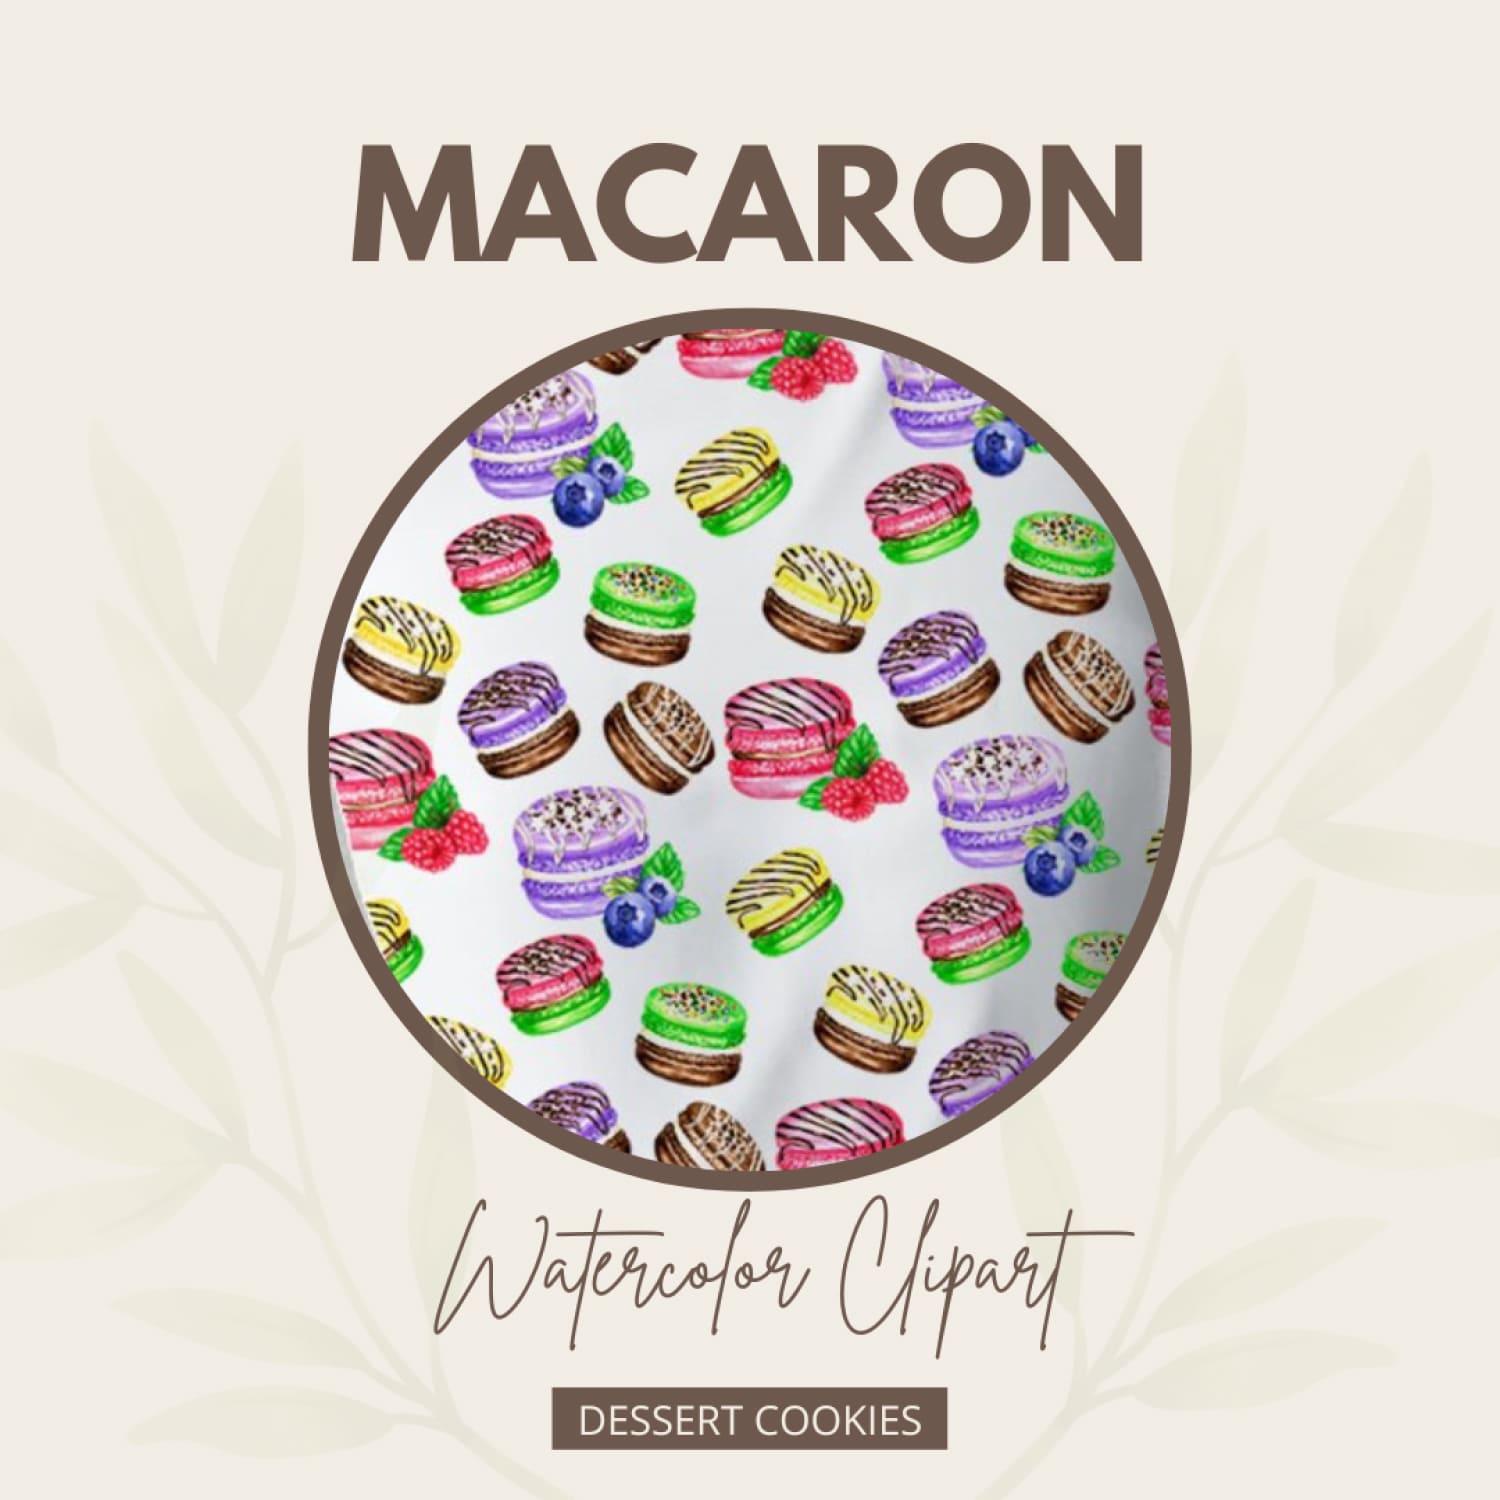 Macaron Watercolor Clipart Dessert Cookies, French Sweets.